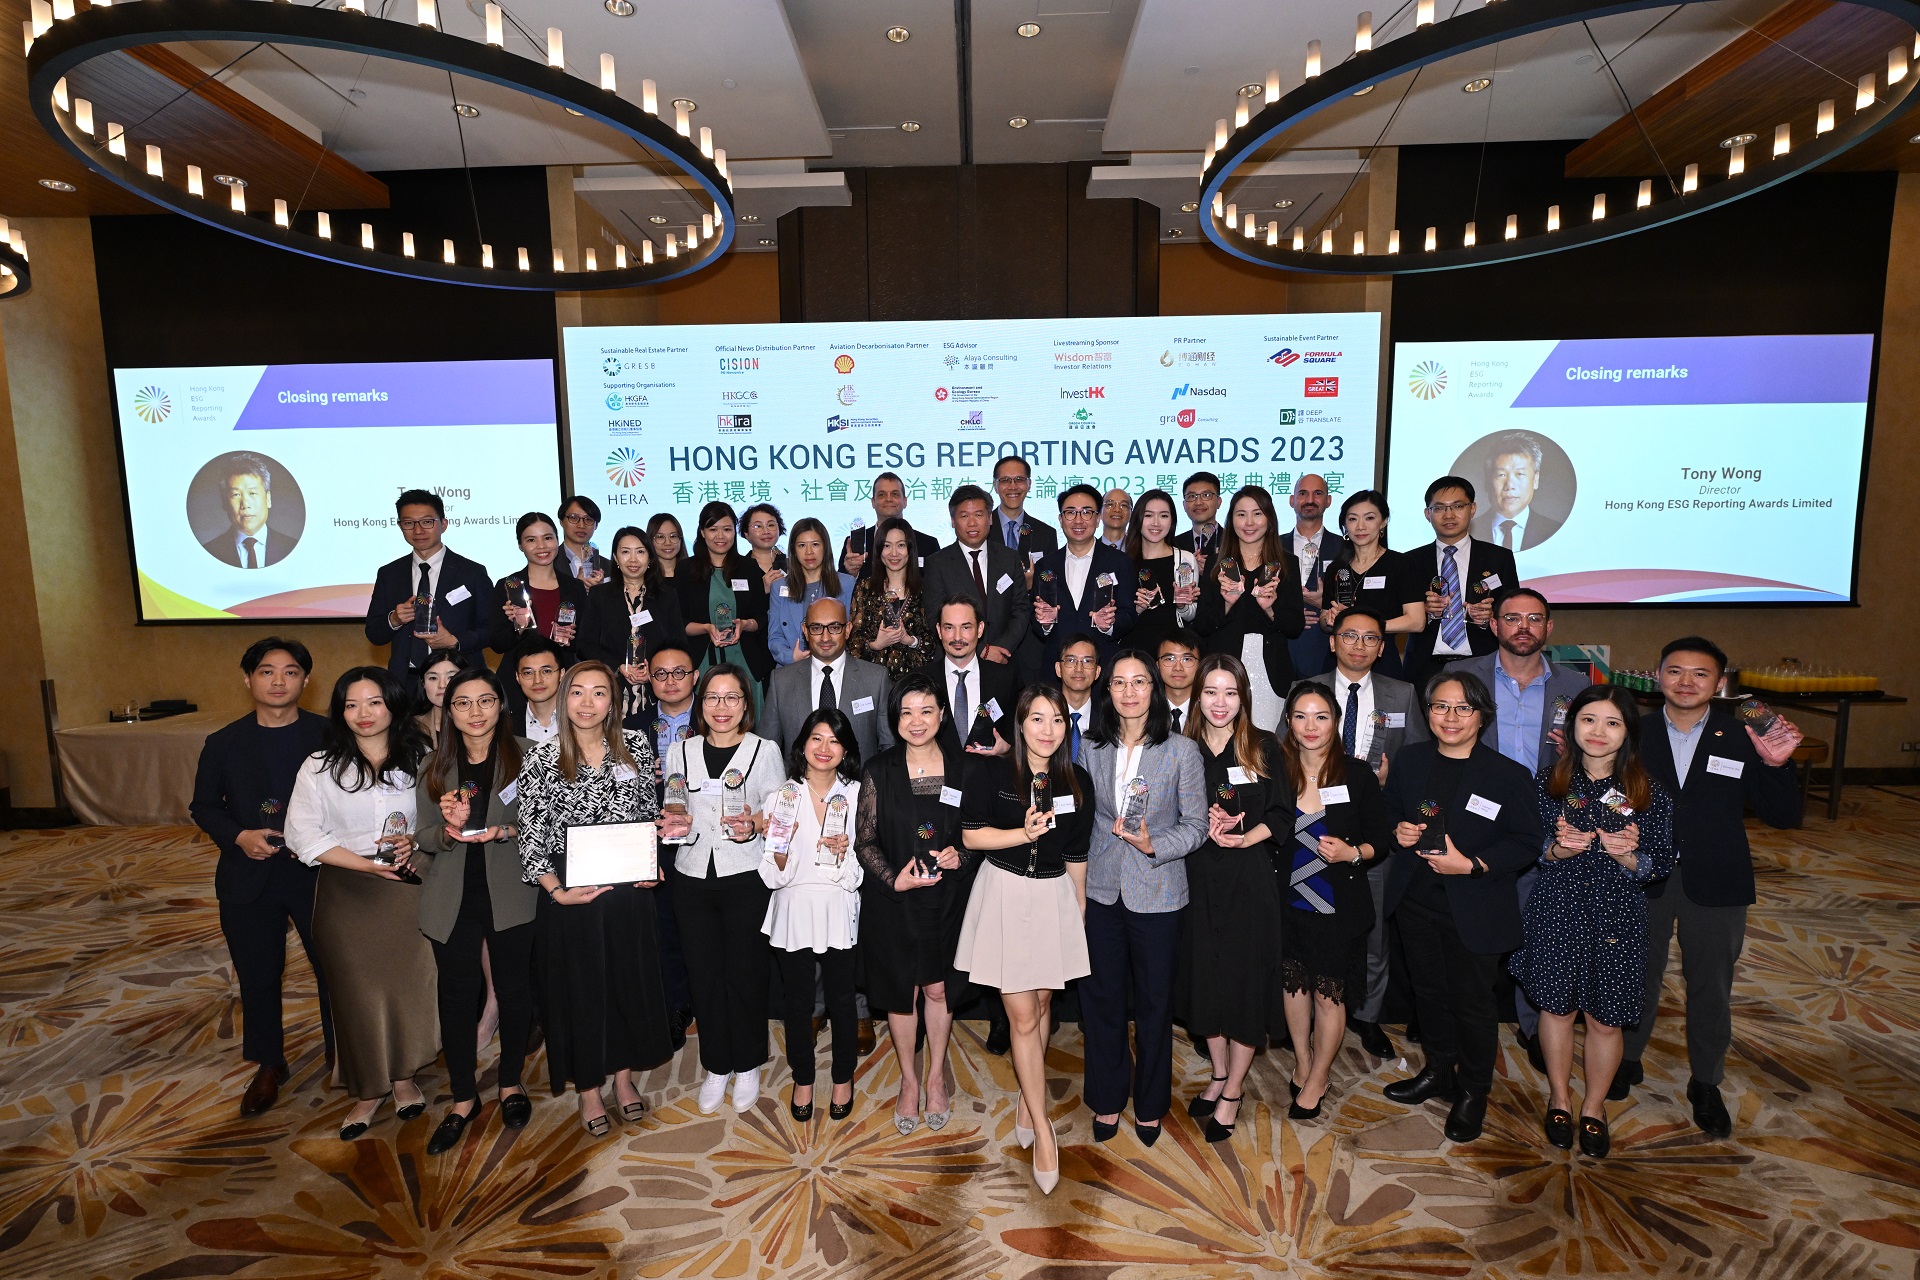 Hang Lung receives the Grand Award for Excellence in Environmental Positive Impact, along with Commendations for Best ESG Report - Large Cap and Carbon Neutral Award at the Hong Kong ESG Reporting Awards (HERA) 2023